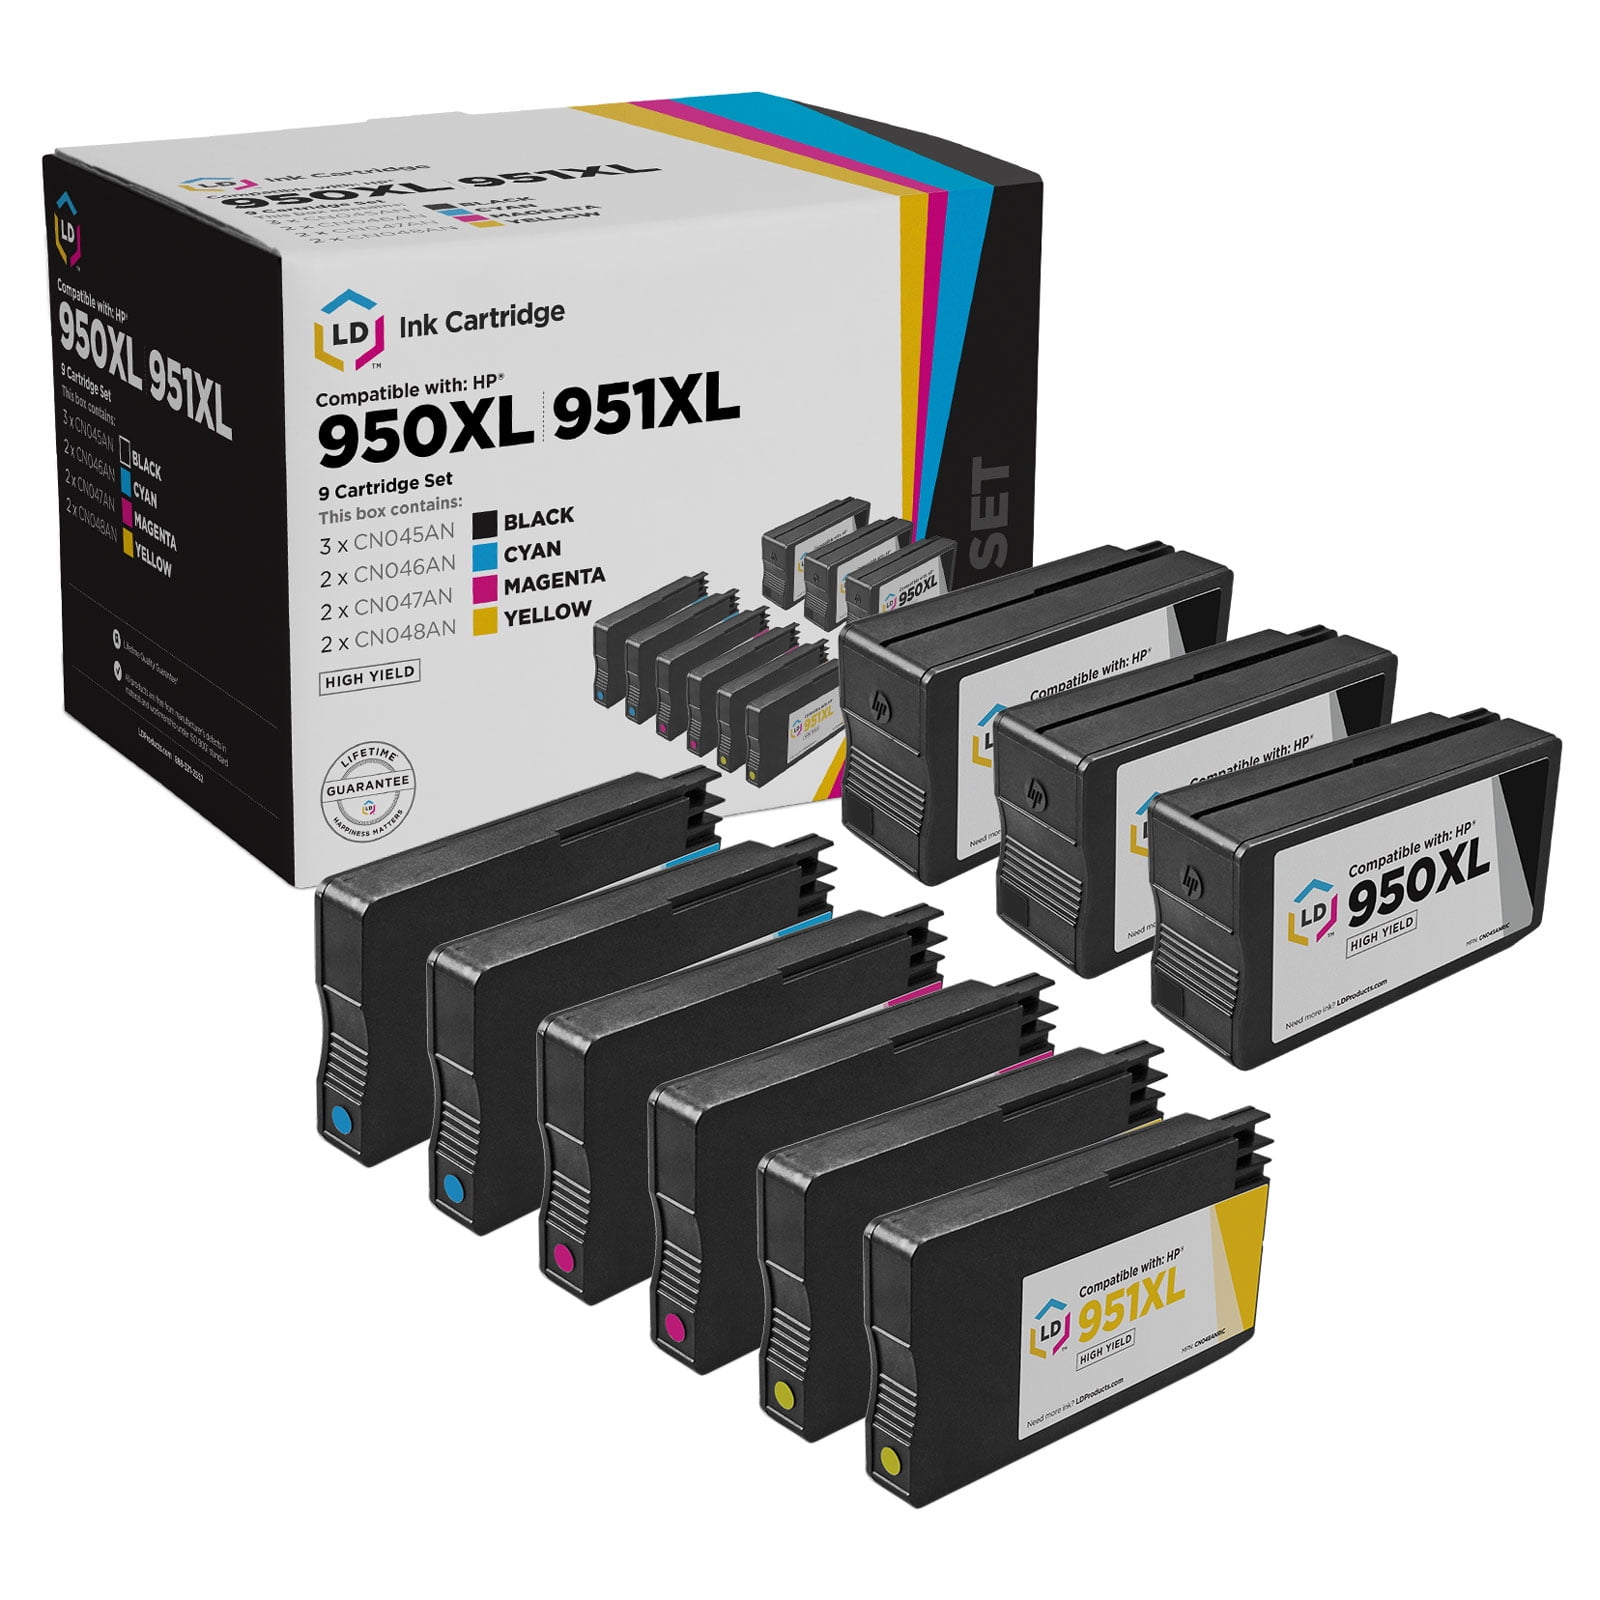 276dw MFP 8616 & 8620 8600 Plus 8600 Premium Cyan LD Products Compatible Ink Cartridge Replacement for HP 951XL CN046AN High Yield 8610 Pro: 251dw for use in OfficeJet 8600 8600 8100 8615 